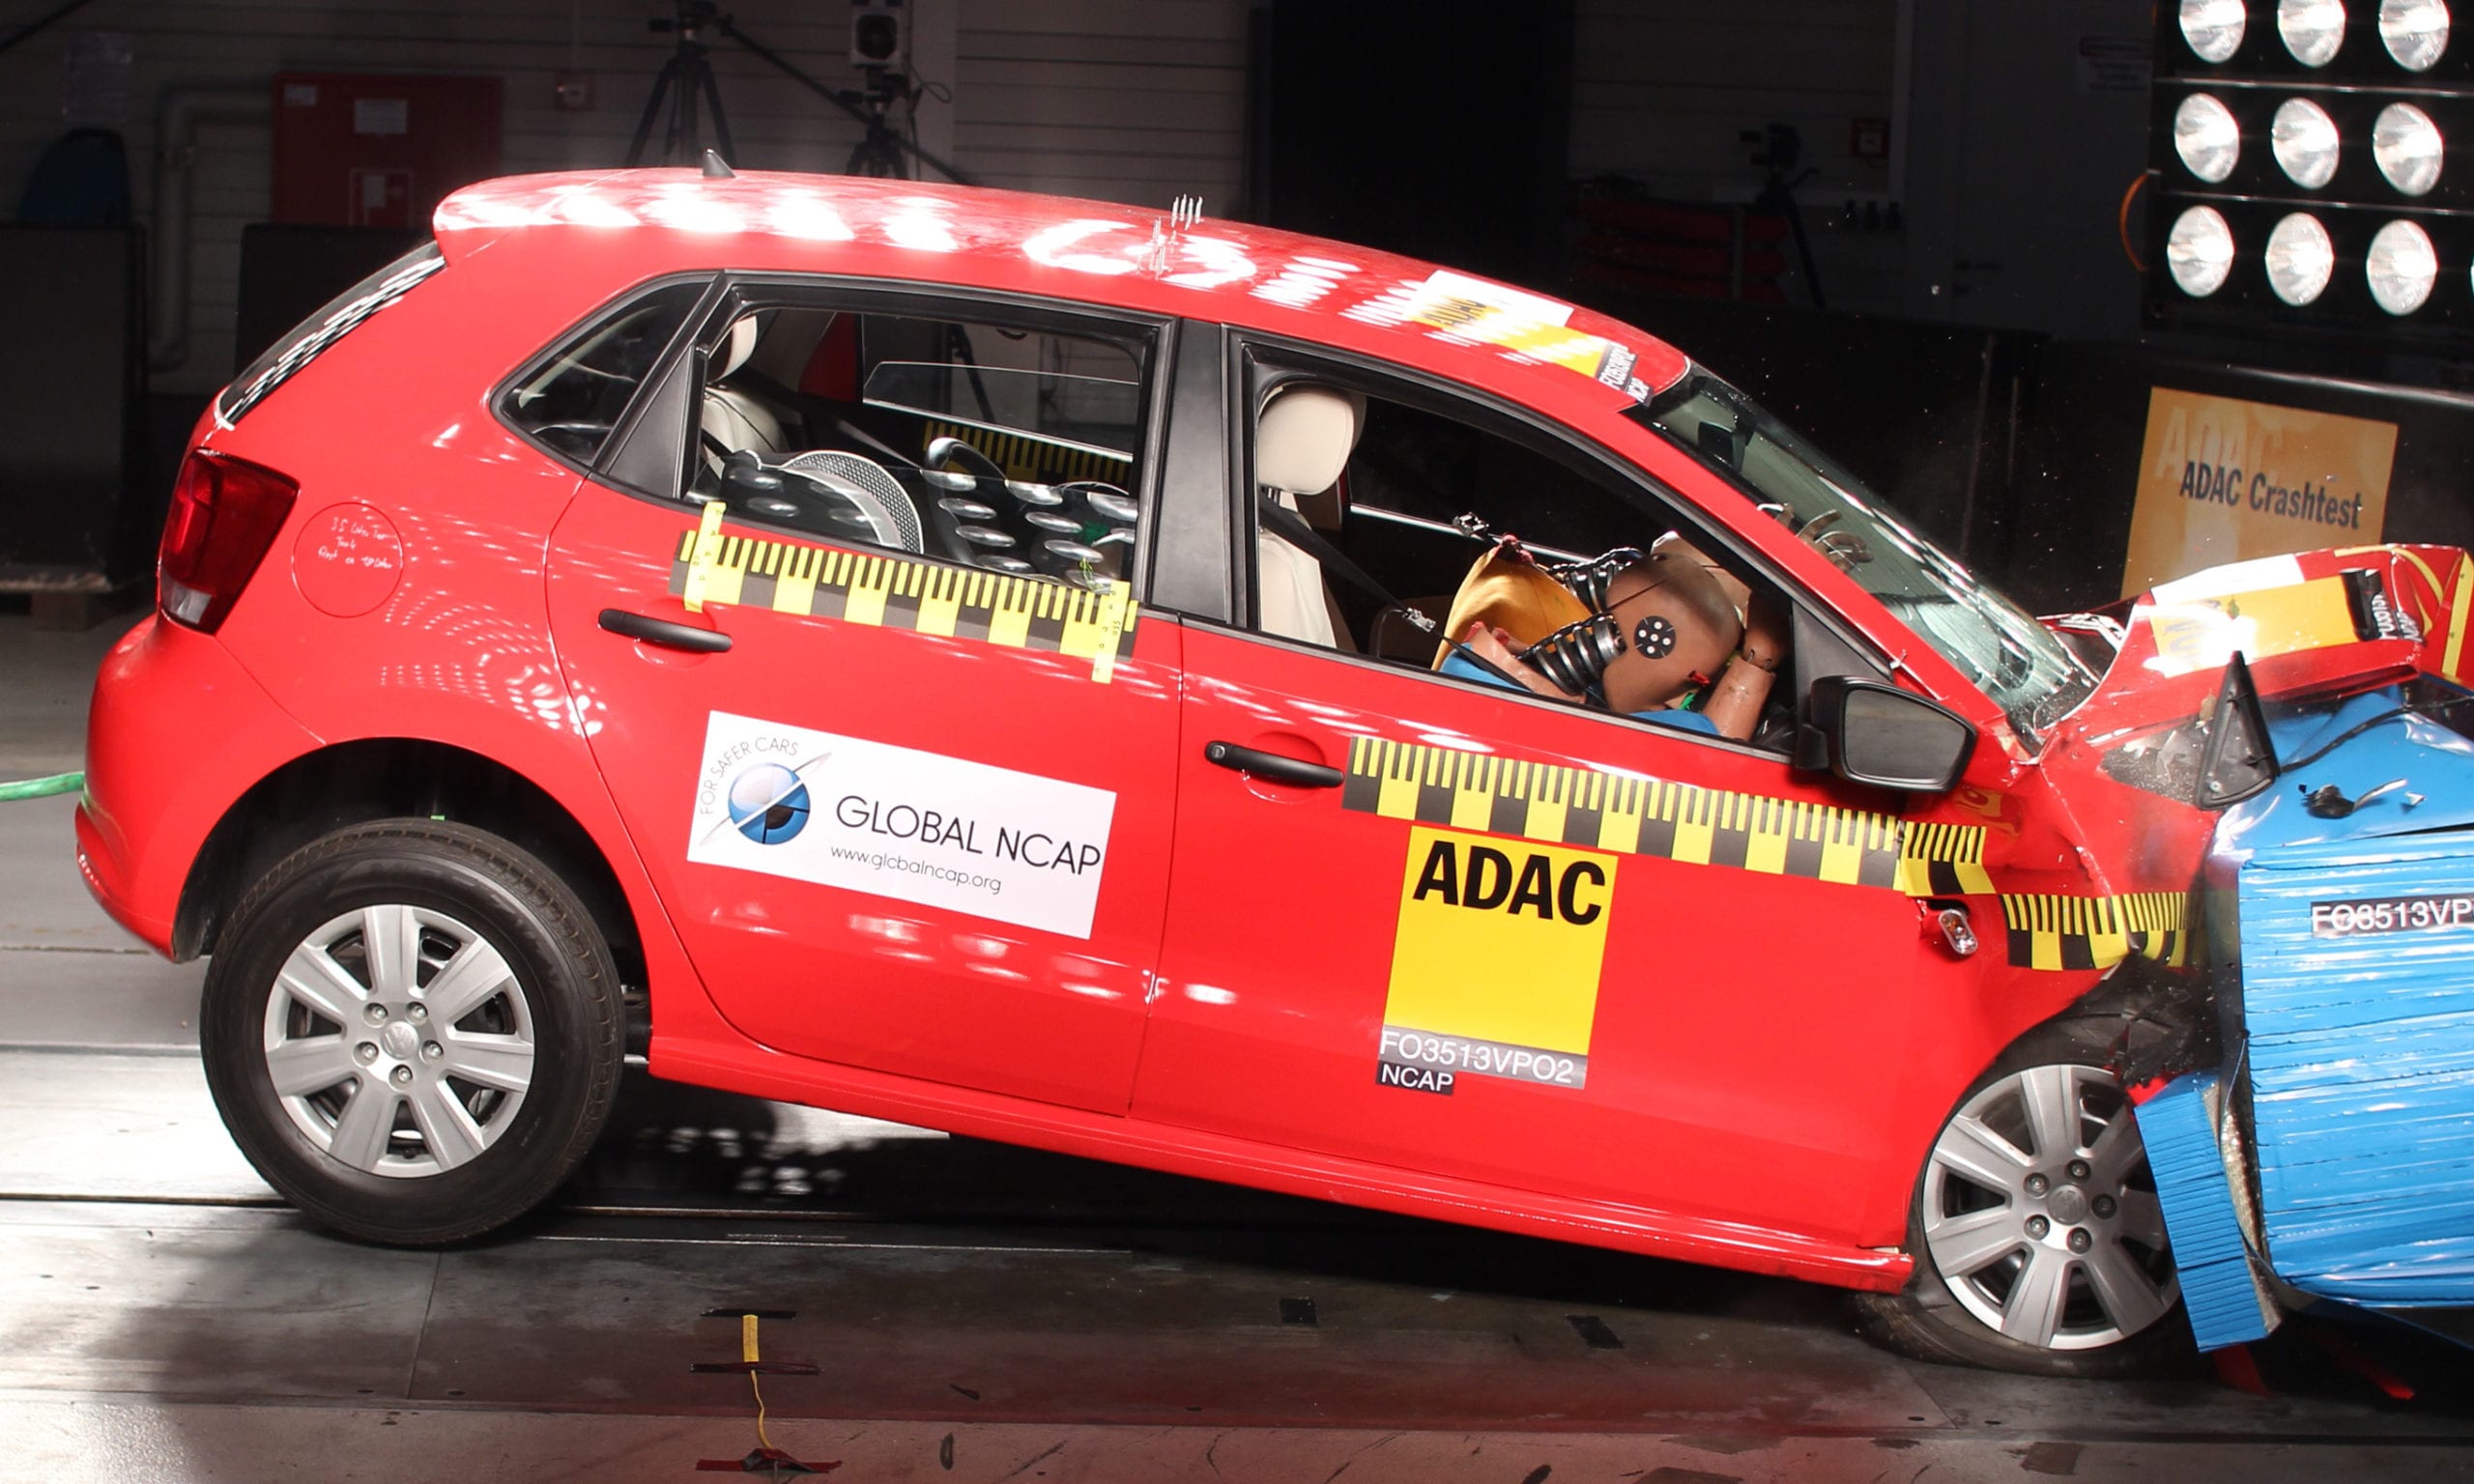 VW Polo no airbags crash test scaled